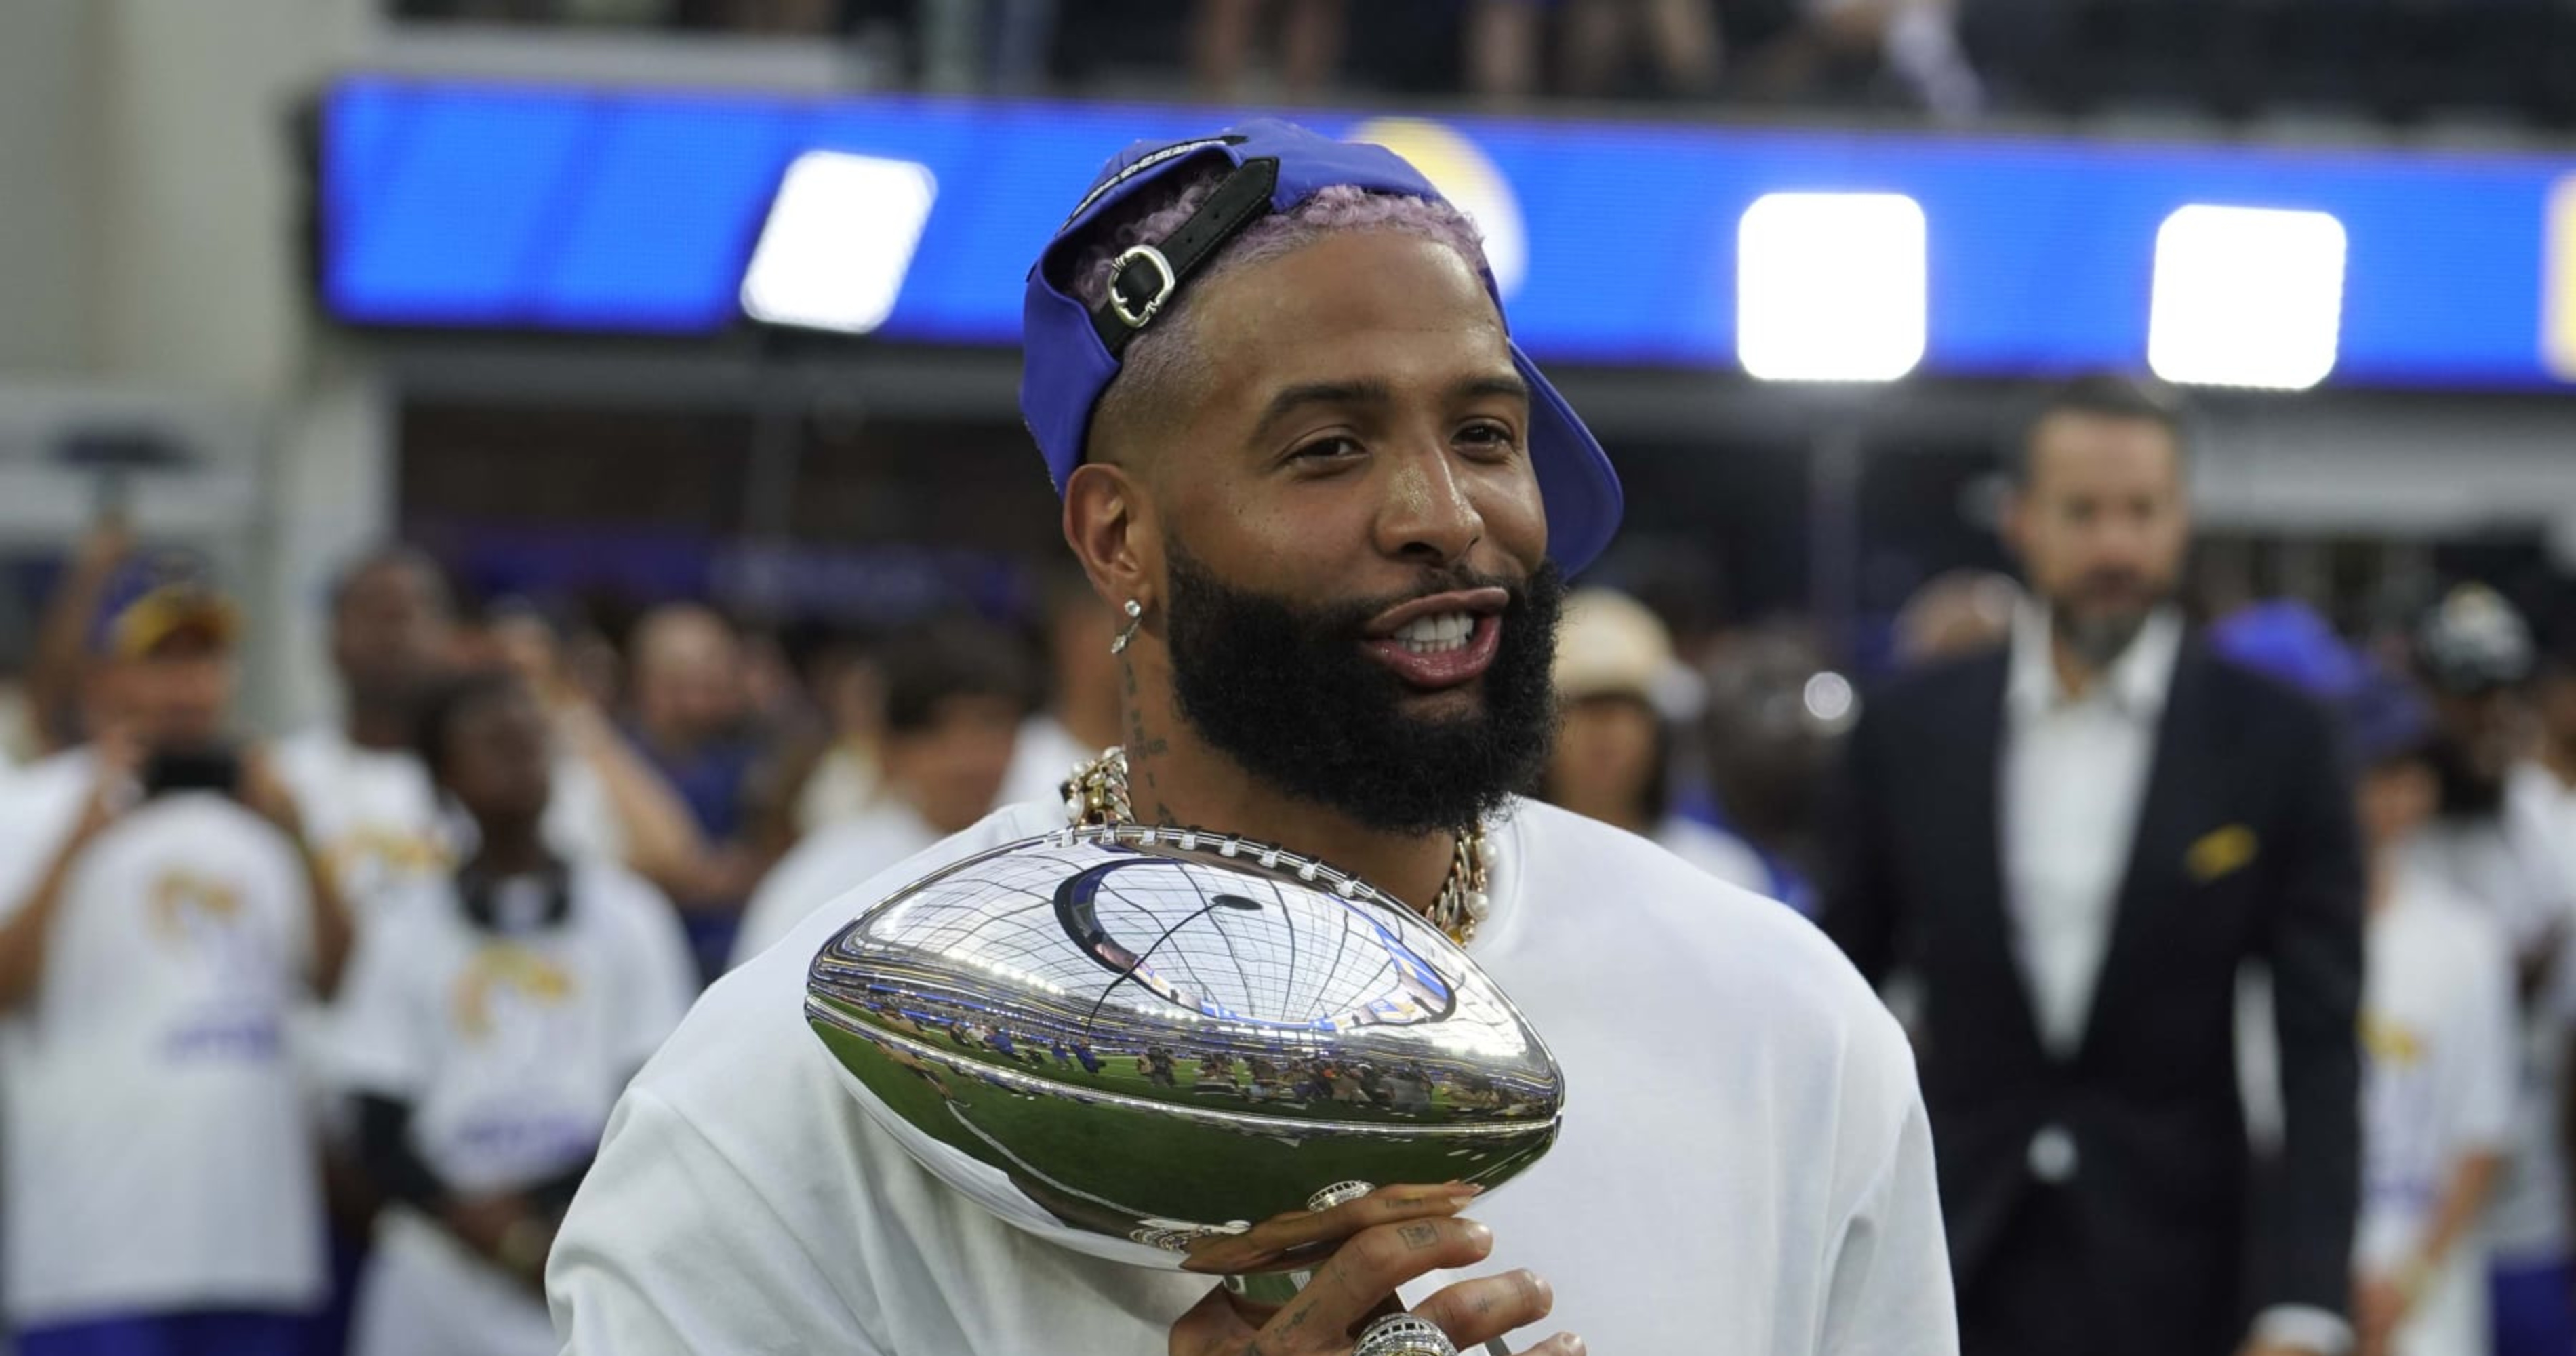 Baltimore Ravens agree to 1-year deal with Odell Beckham Jr.